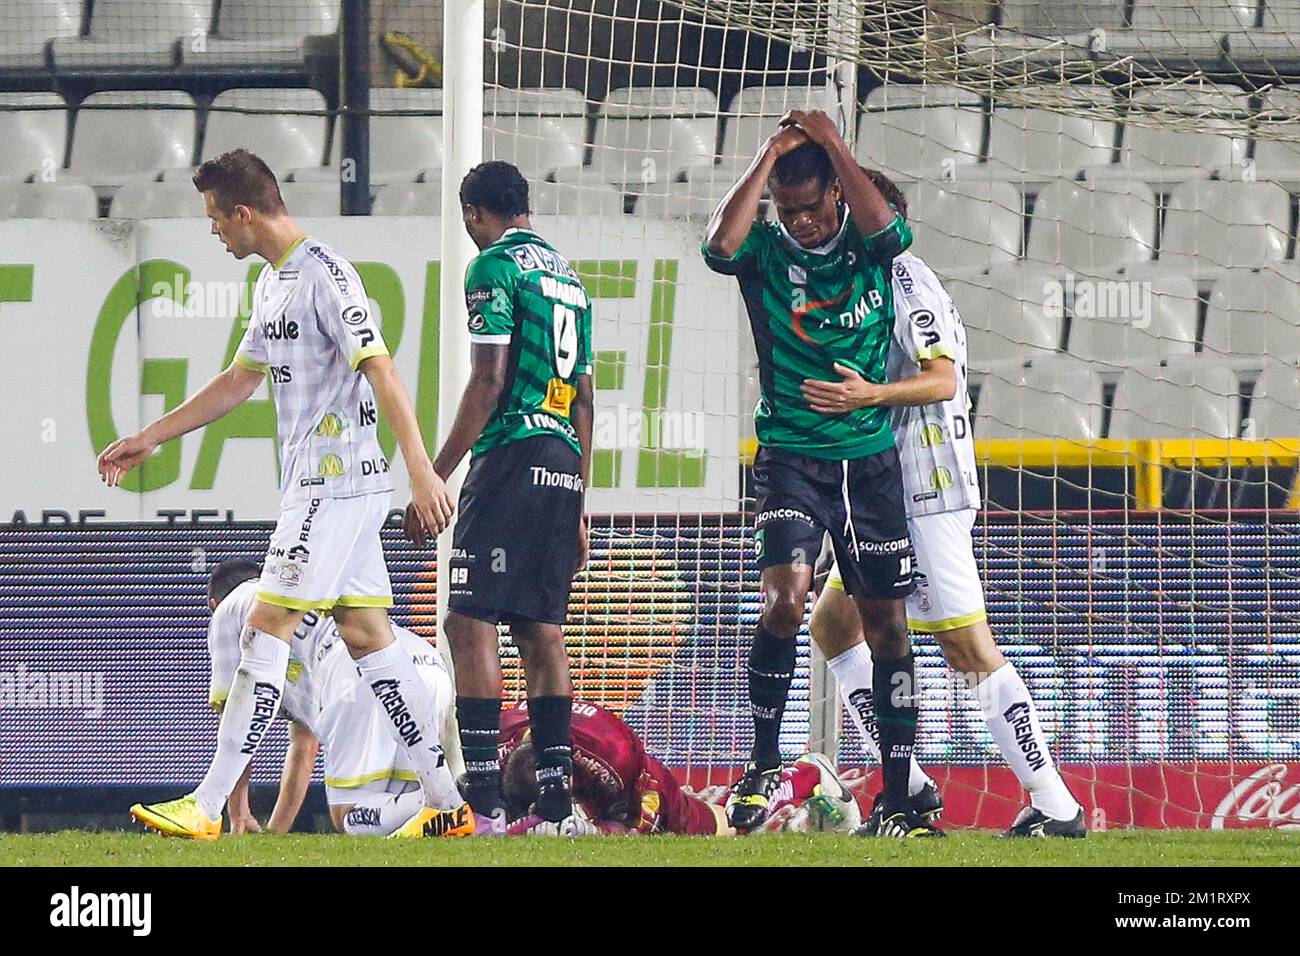 20131019 - BRUGGE, BELGIUM: Cercle's Michael Uchebo reacts during the Jupiler Pro League match between Cercle Brugge and Zulte Waregem, in Brugge, Saturday 19 October 2013, on day 11 of the Belgian soccer championship. BELGA PHOTO BRUNO FAHY Stock Photo